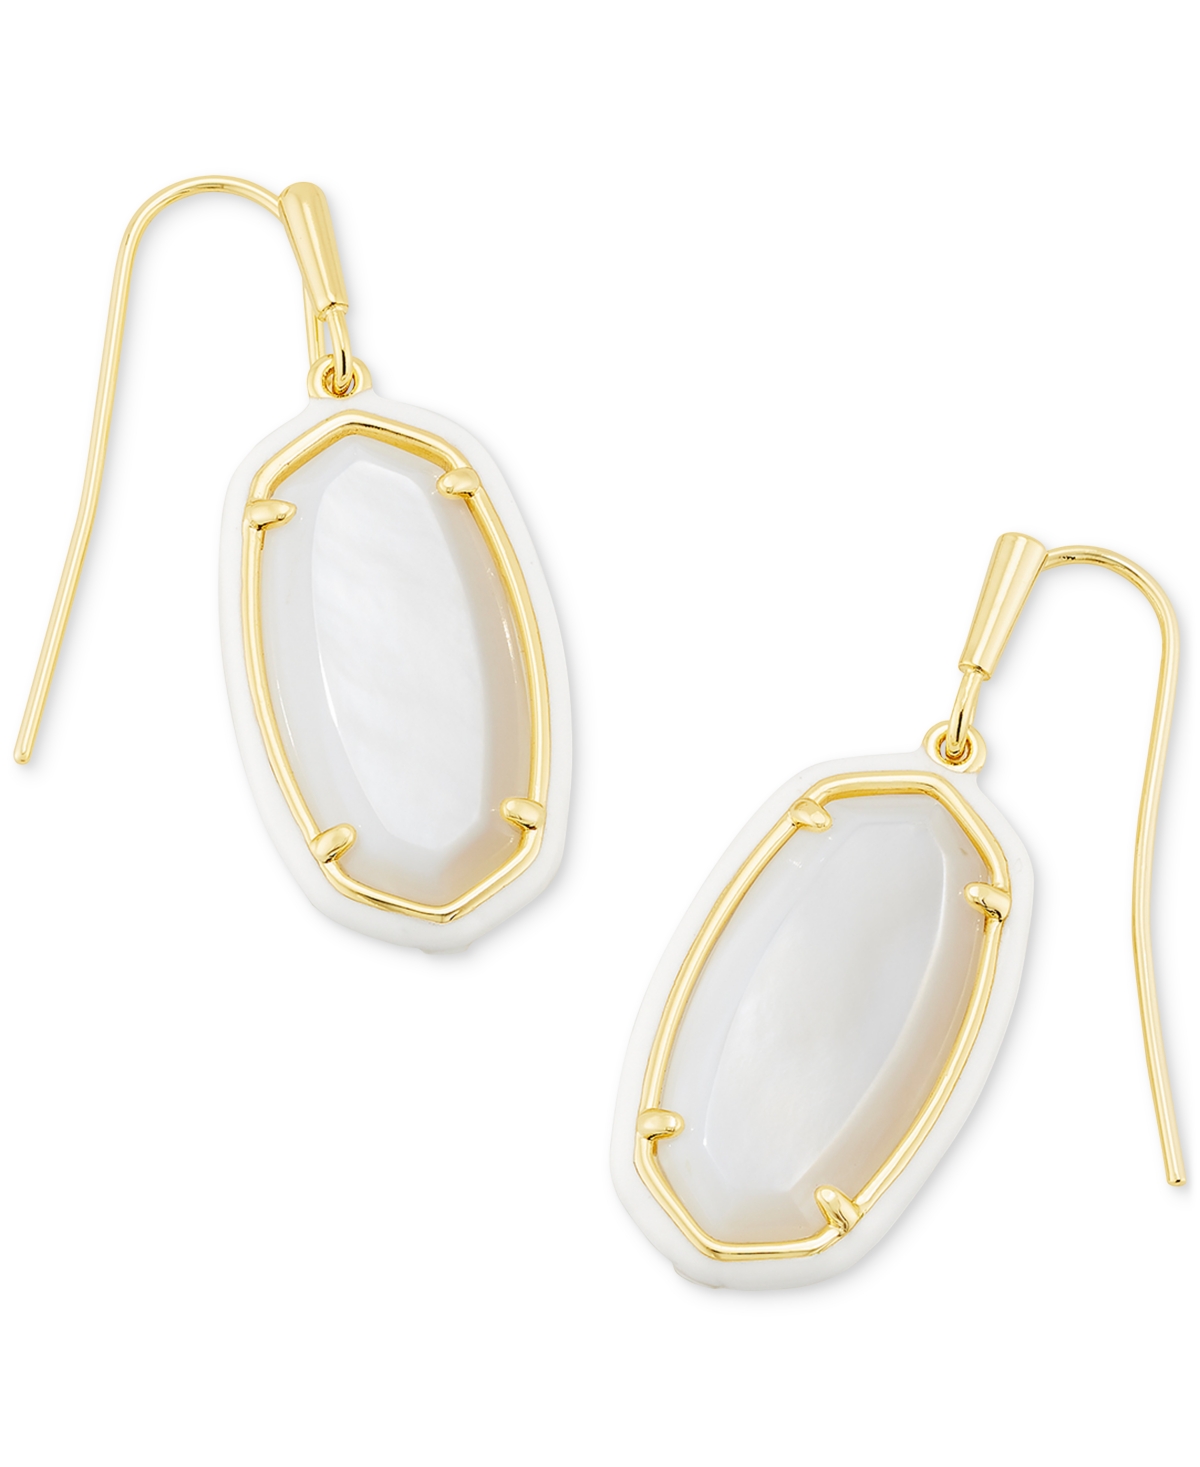 Kendra Scott 14k Gold-plated Oval Stone Drop Earrings In White Mother Of Pearl